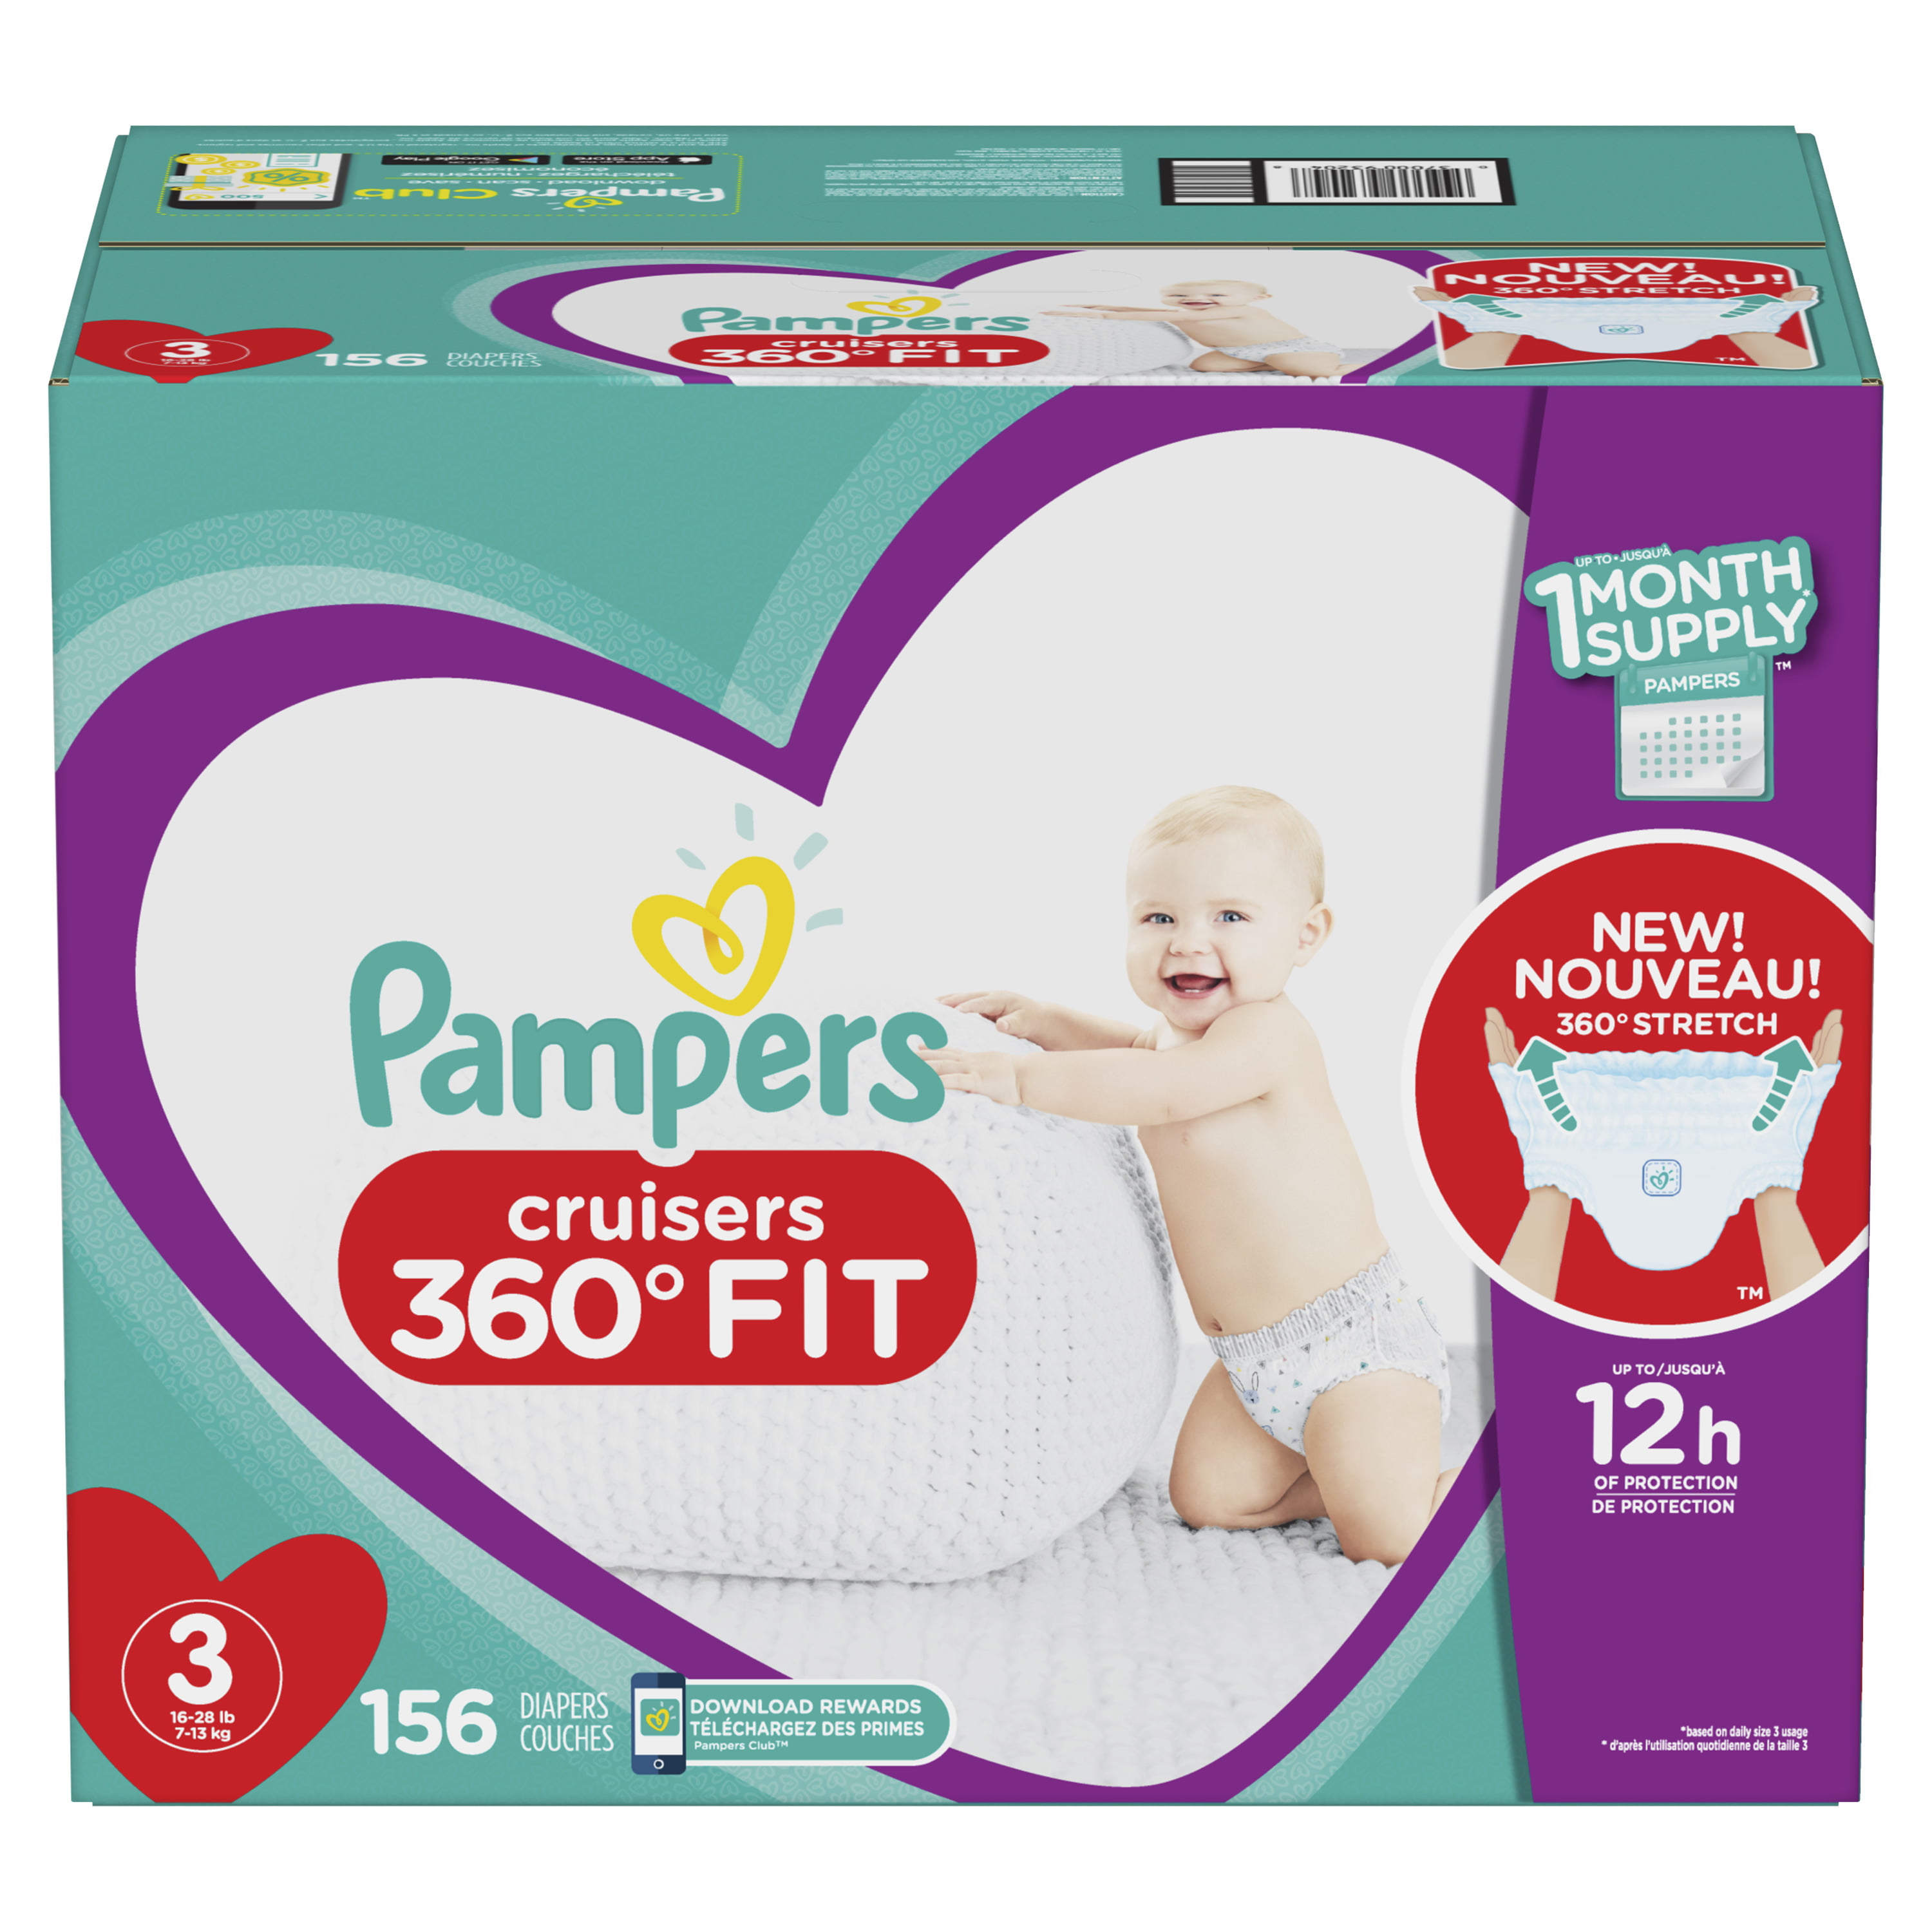 Pampers Active Baby Size Chart